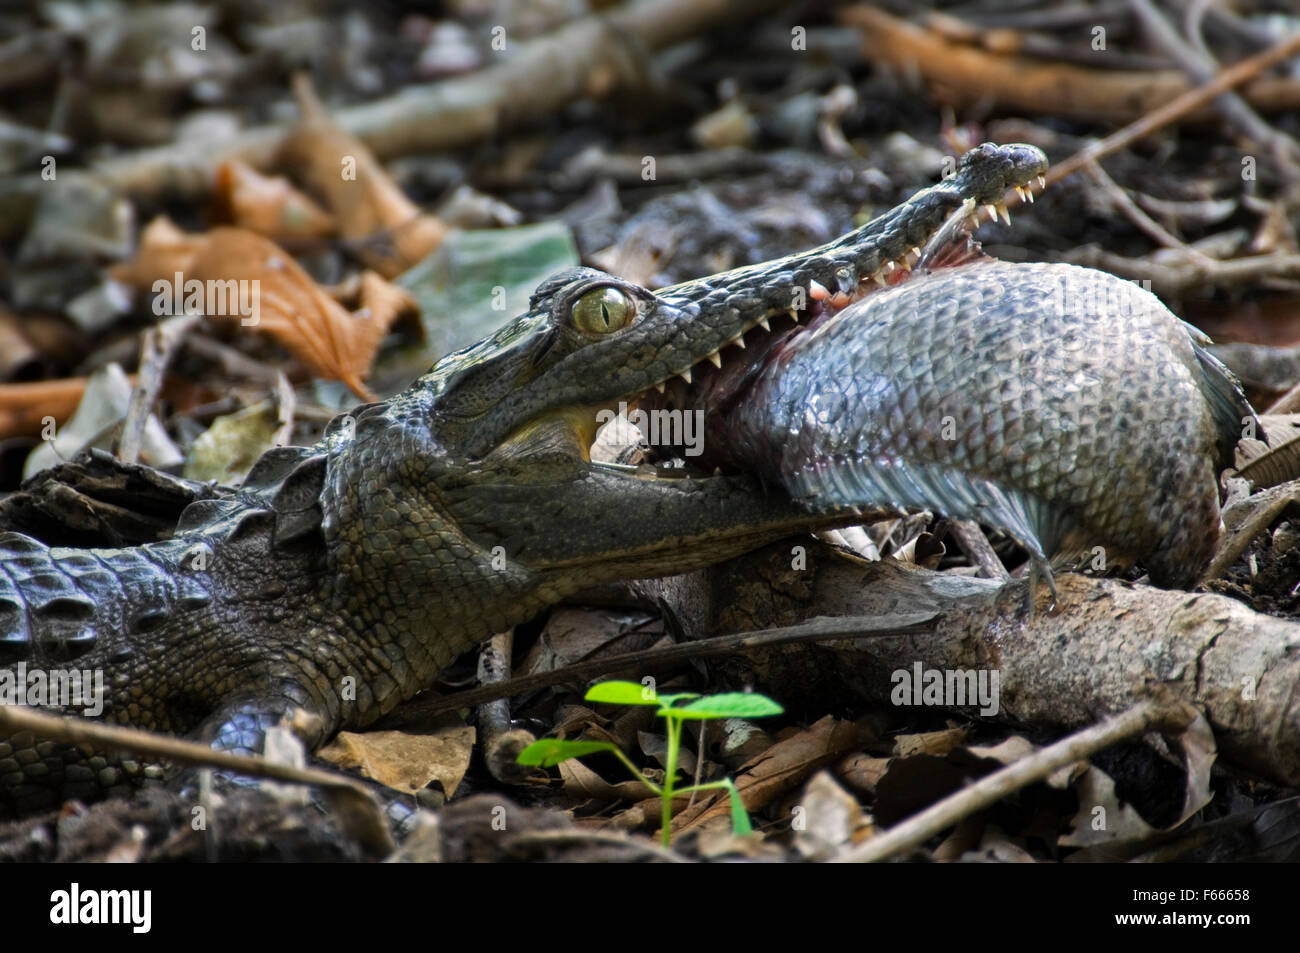 Spectacled caiman / white caiman / common caiman (Caiman crocodilus) swallowing fish, Costa Rica Stock Photo